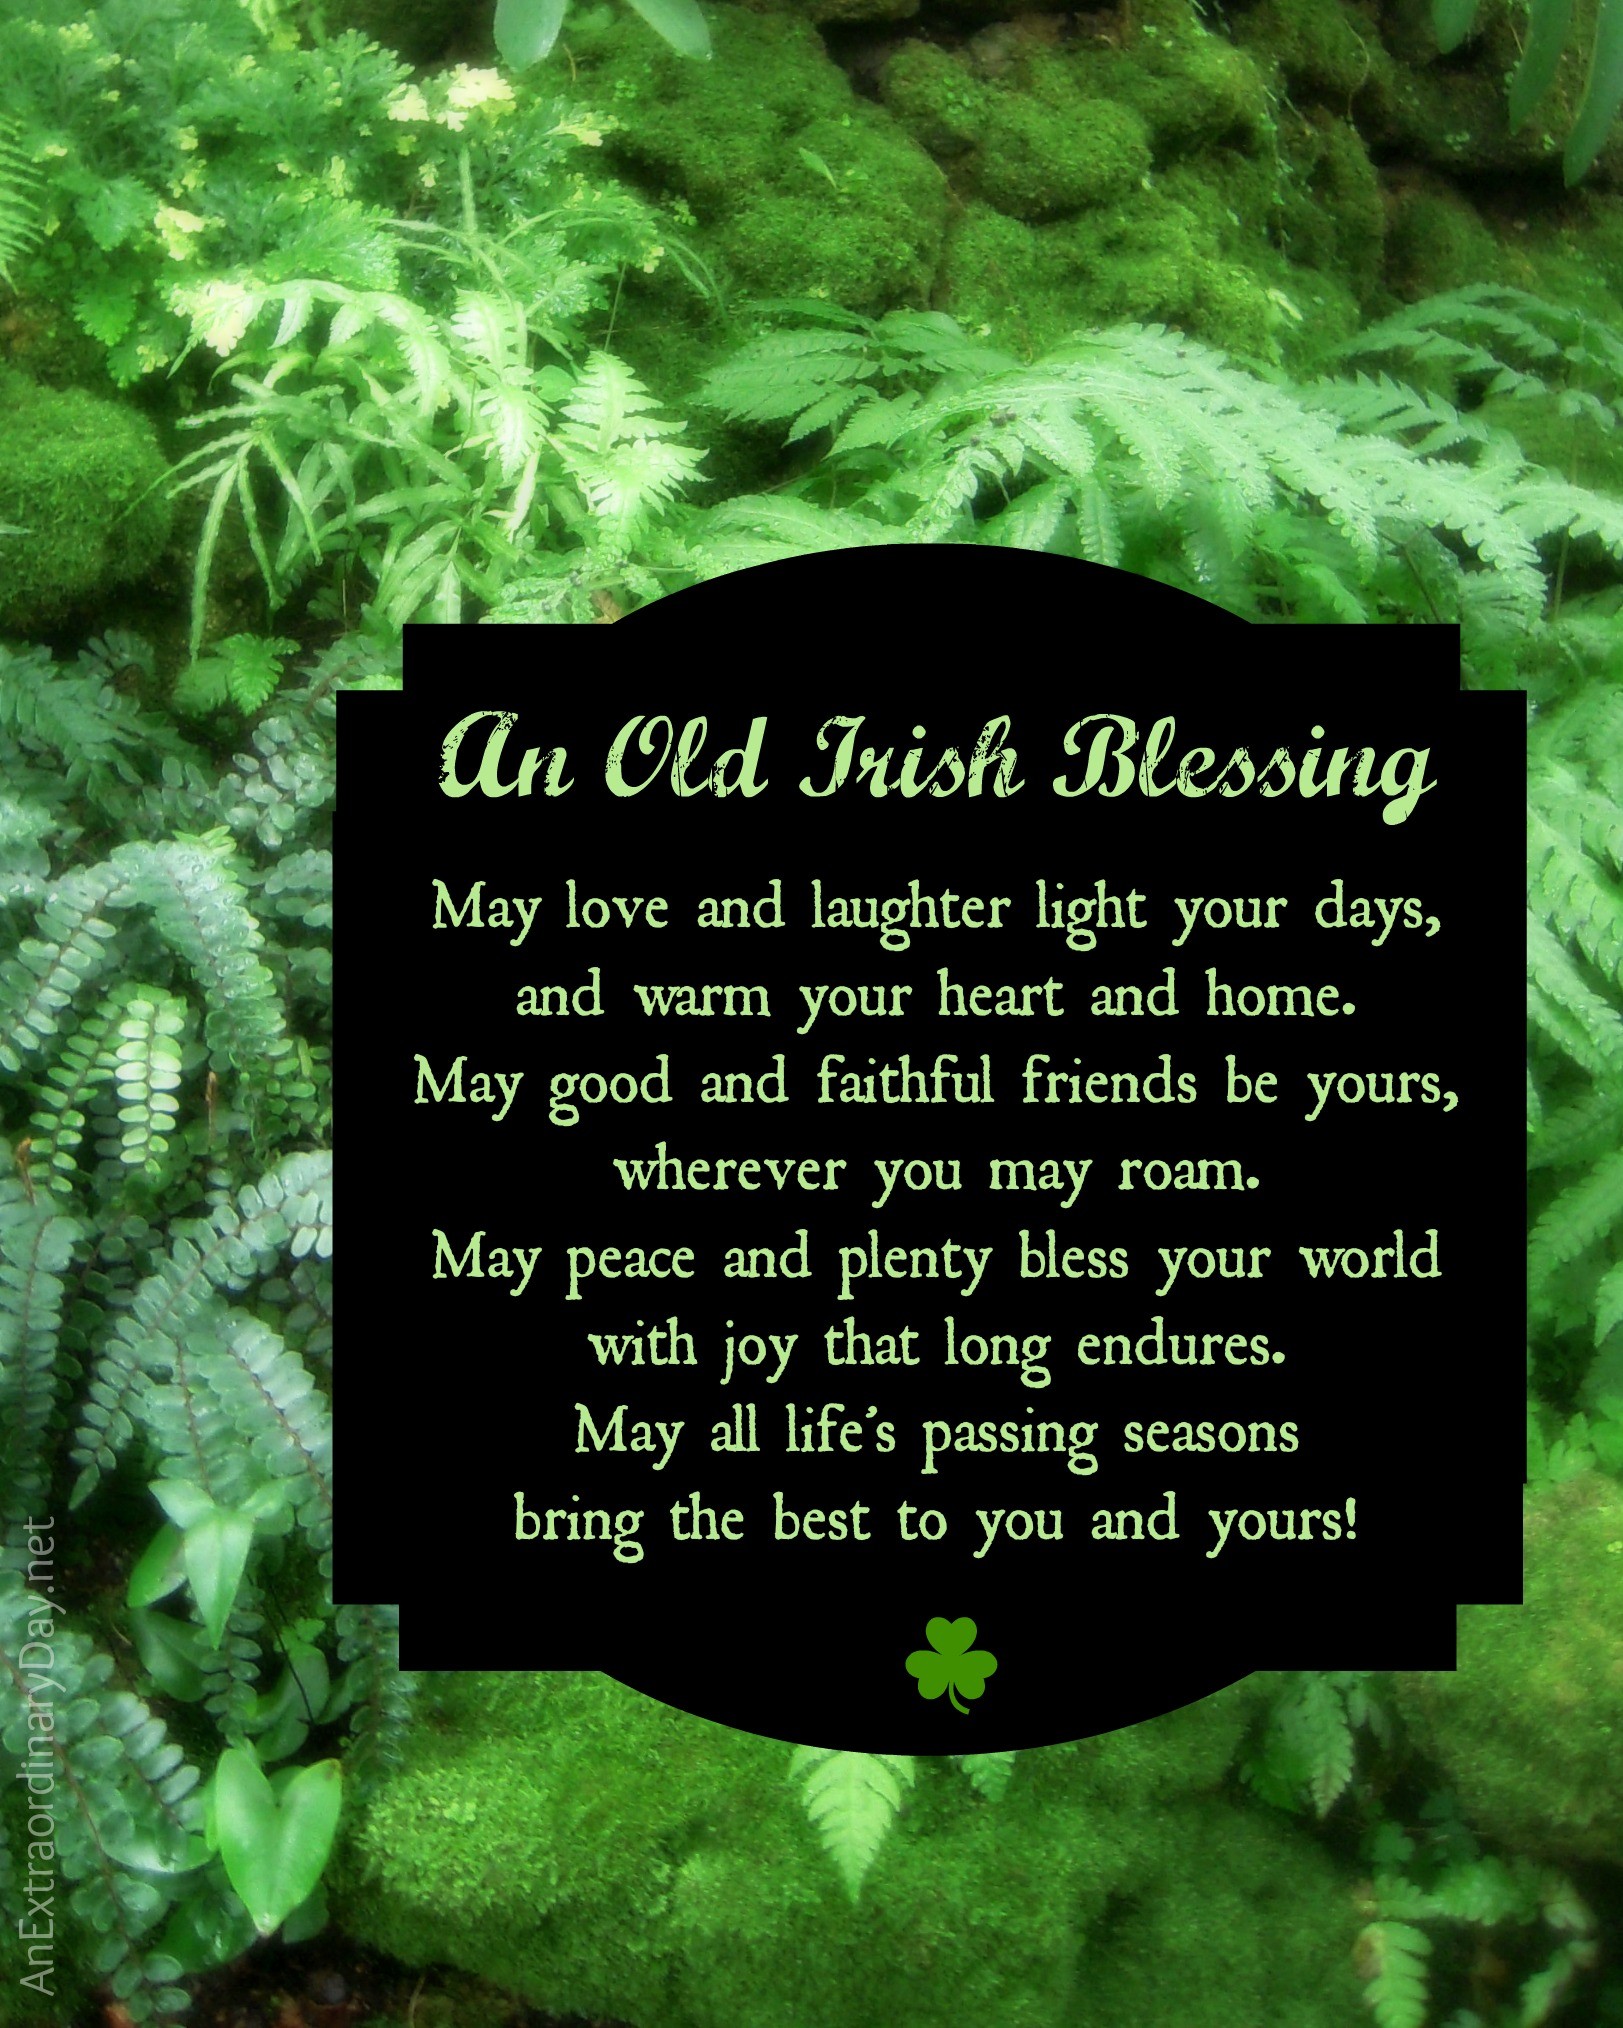 1623x2028 Old Irish Blessing - Free Printable - frame it, make it into a card, for  personal use only.